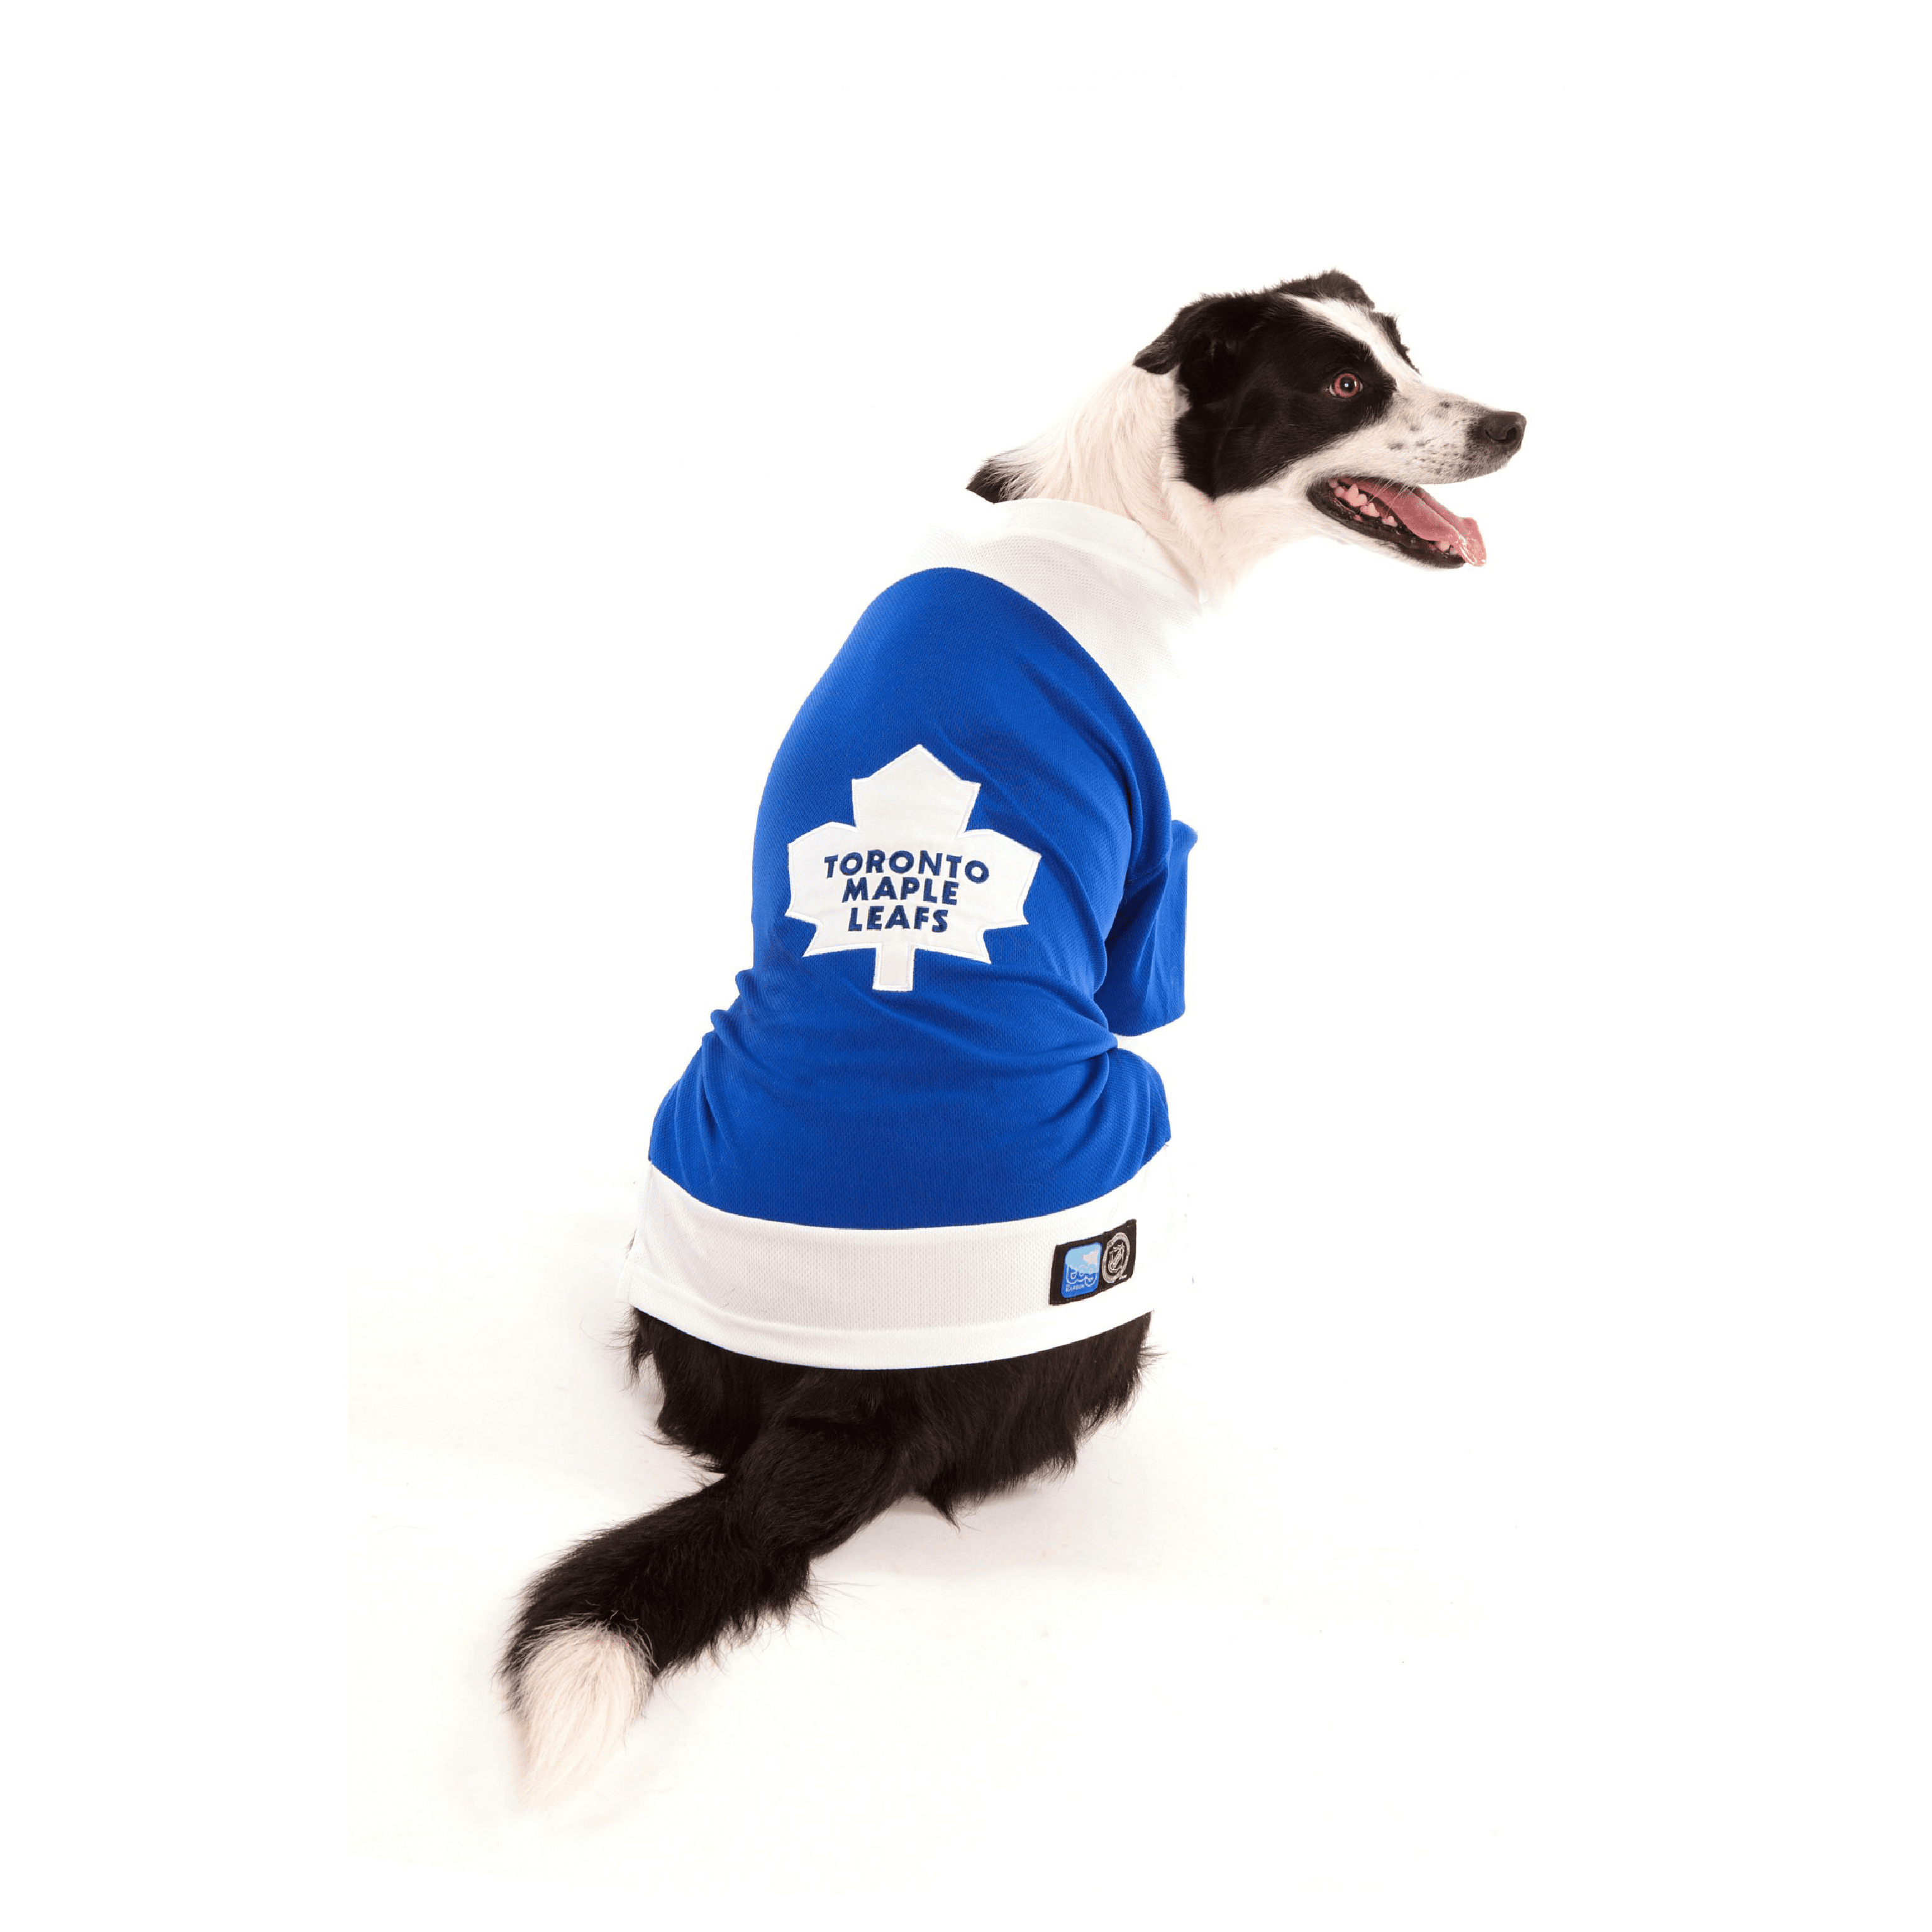  Pets First NHL Toronto Maple Leafs Jersey for Dogs & Cats,  X-Small. - Let Your Pet Be A Real NHL Fan! : Sports & Outdoors